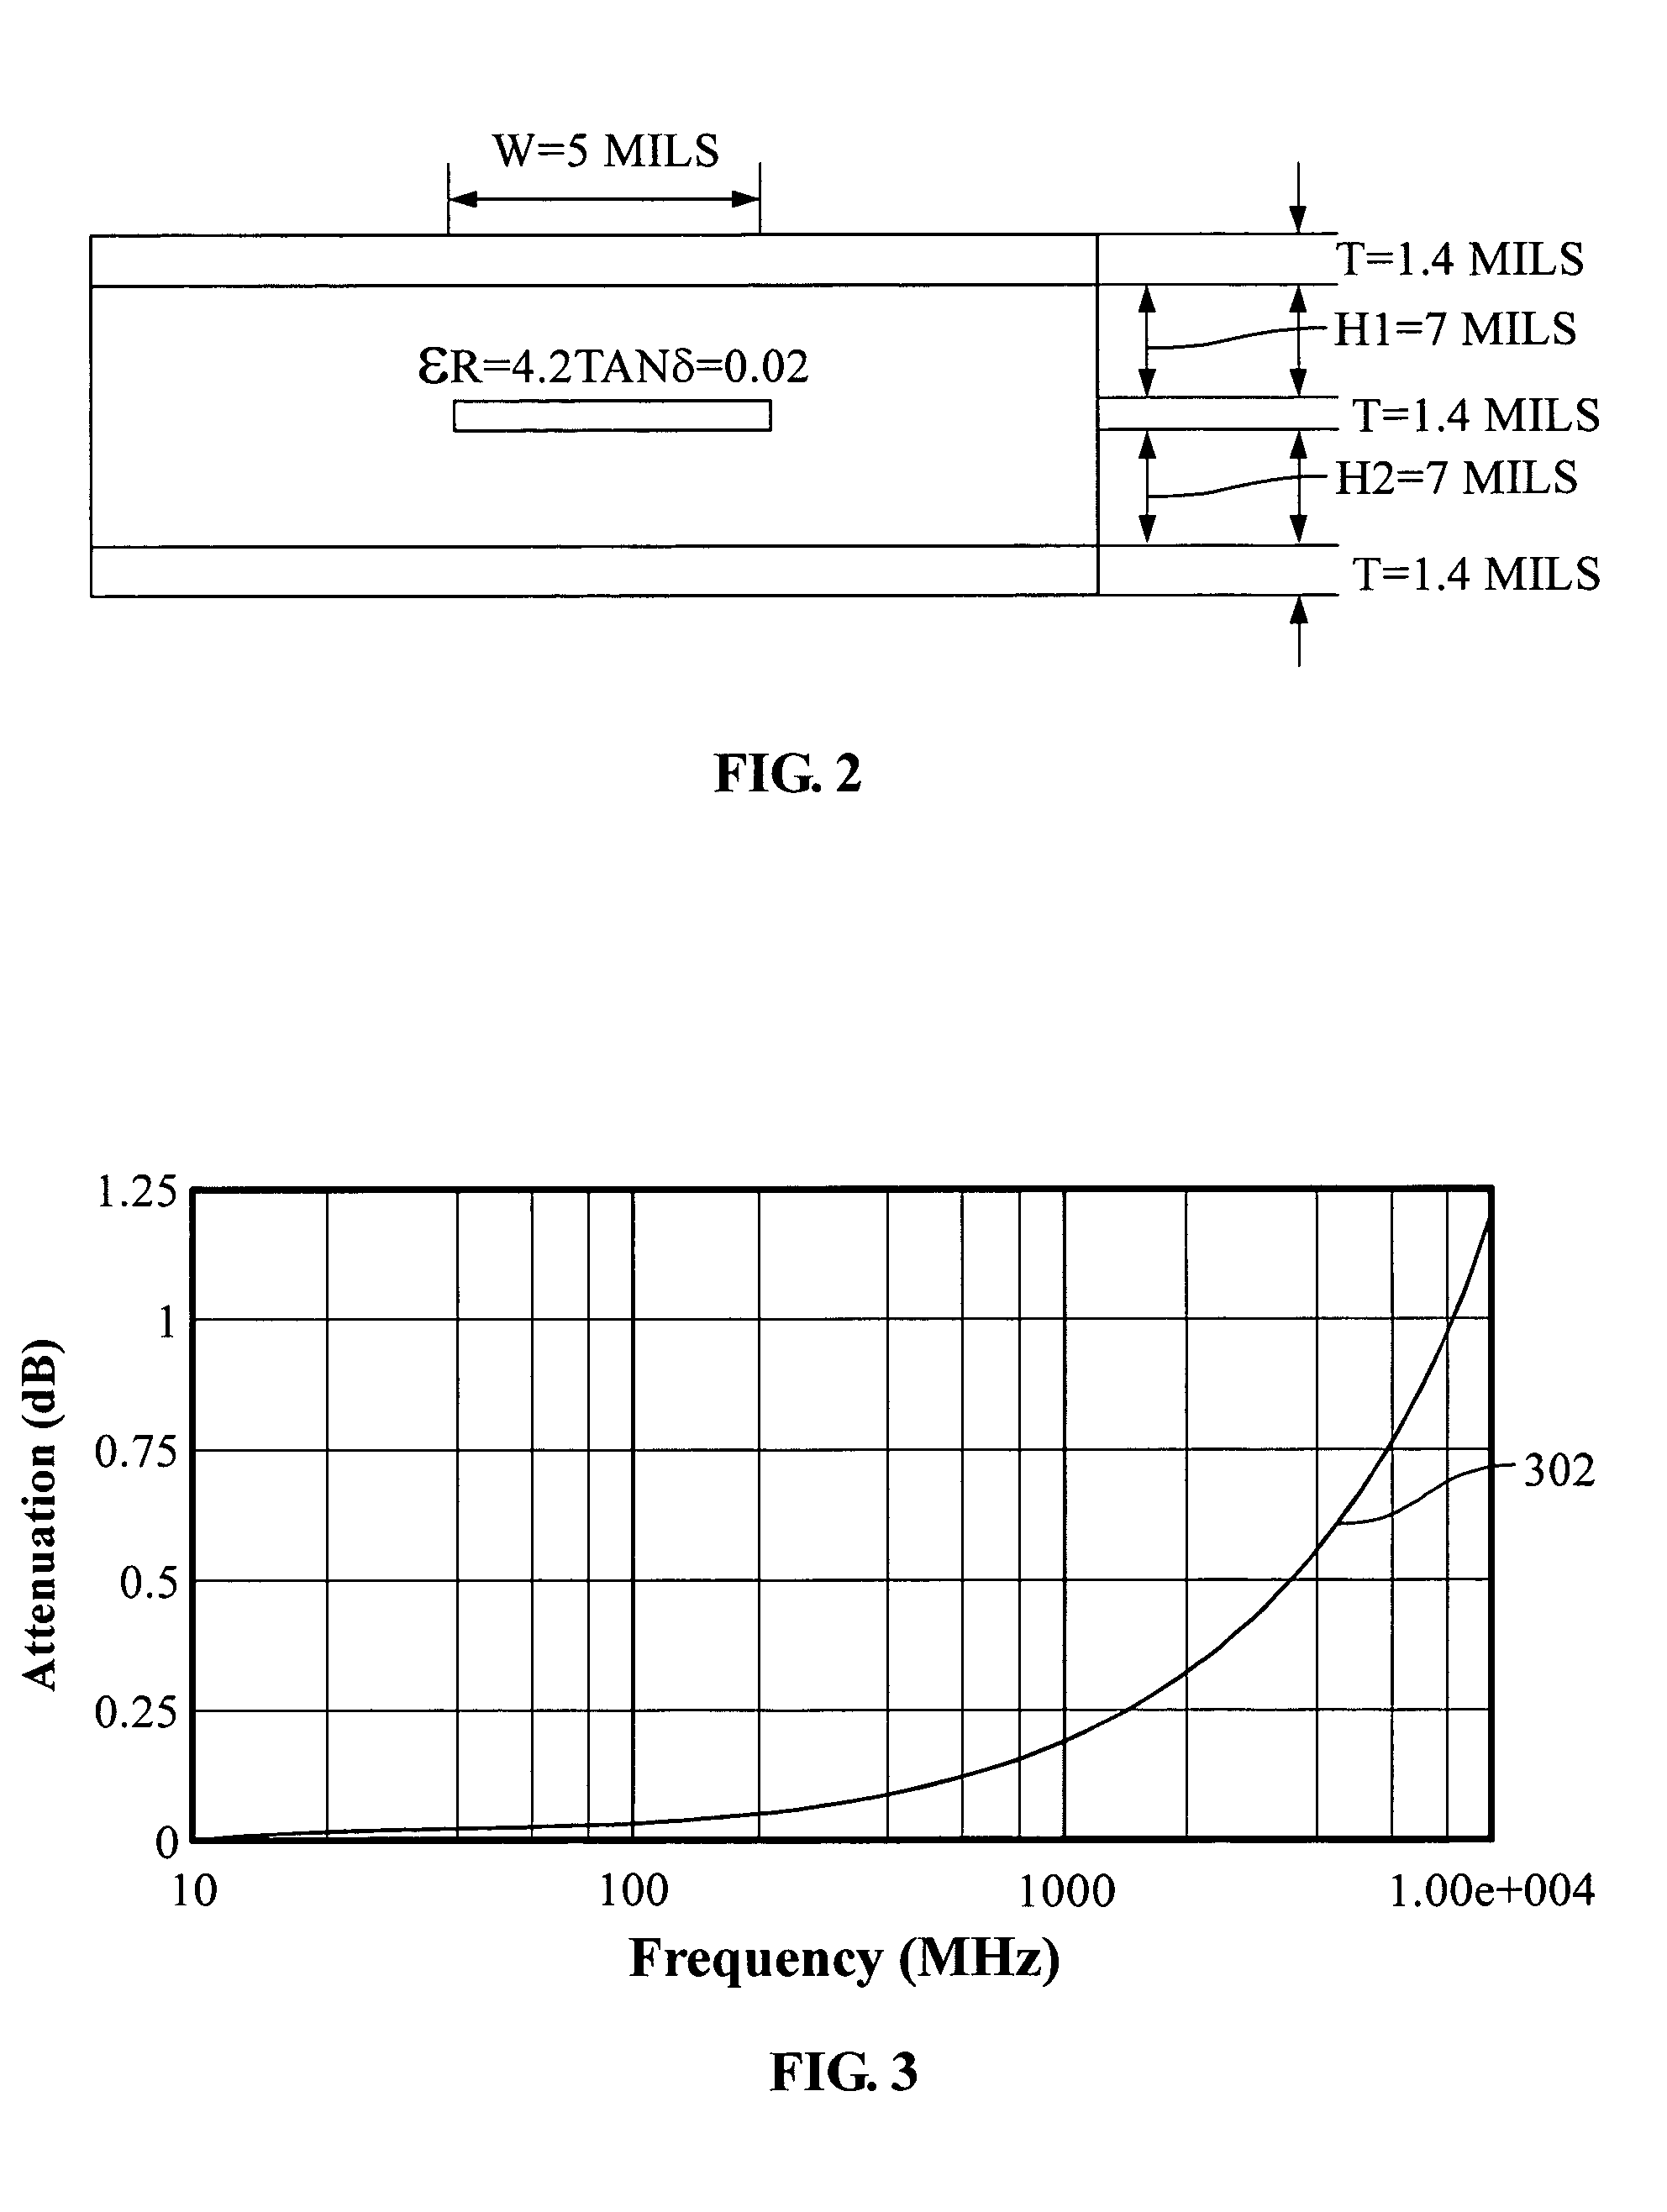 Serial interface amplitude selection for a disk drive in an unknown interconnect environment